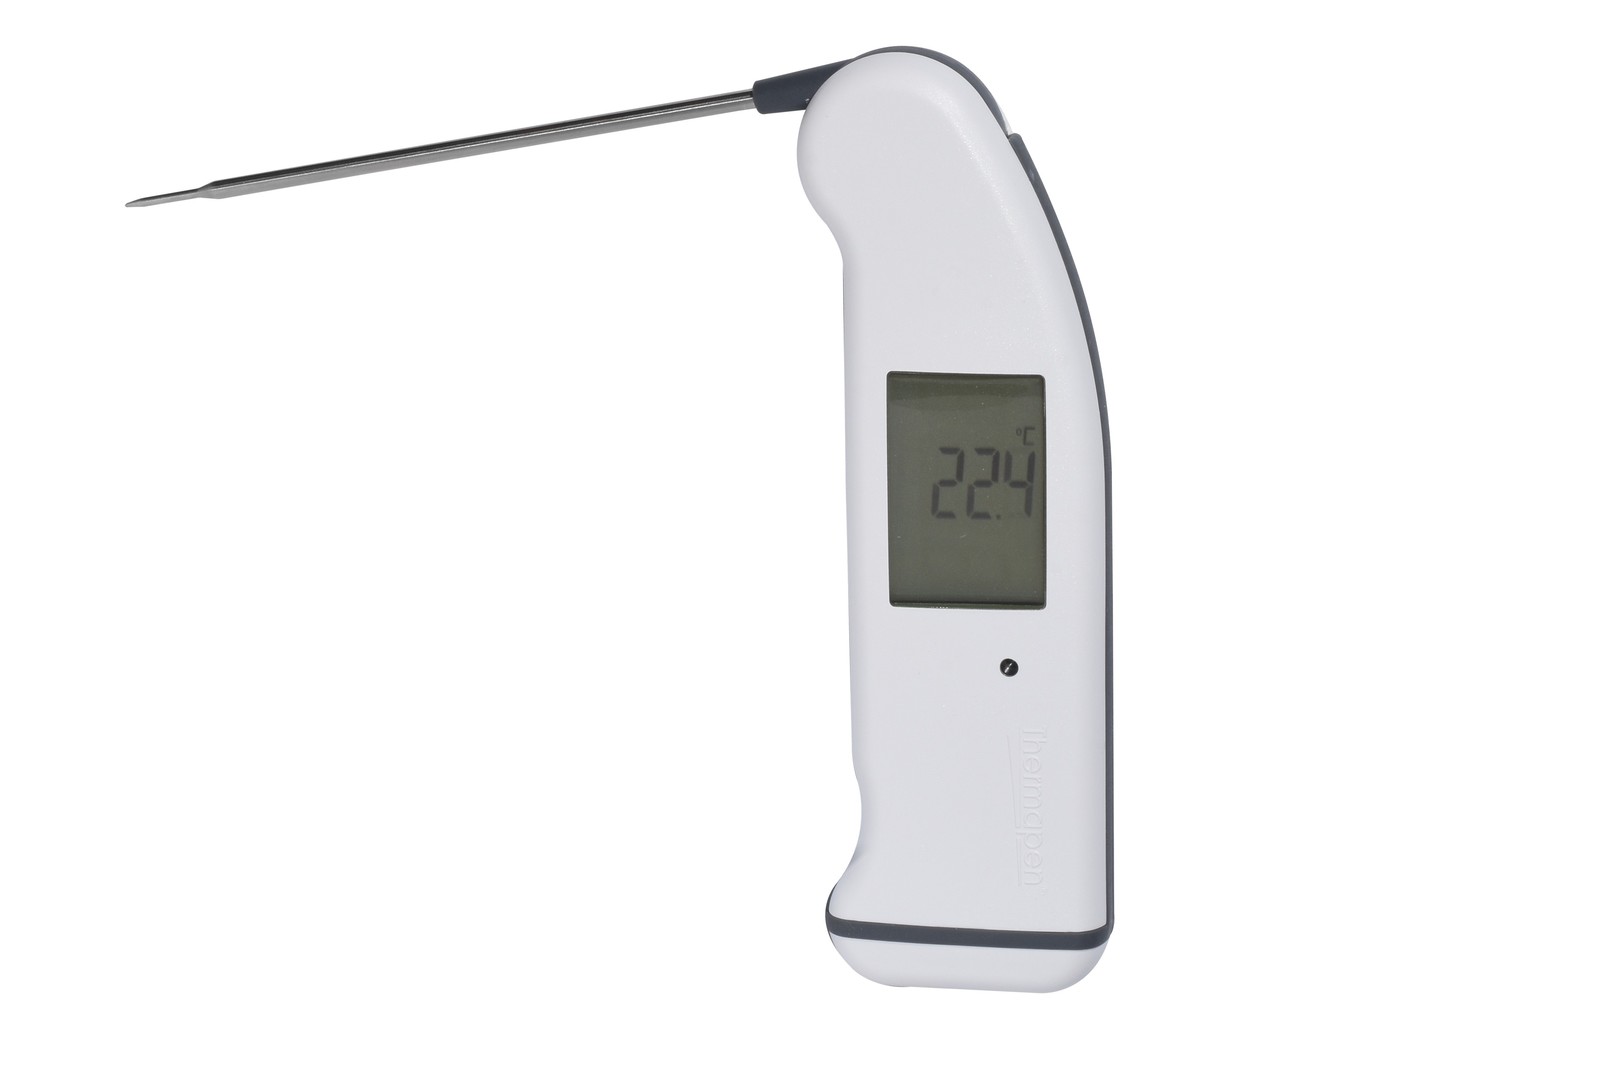 Thermapen One Professional Thermometer